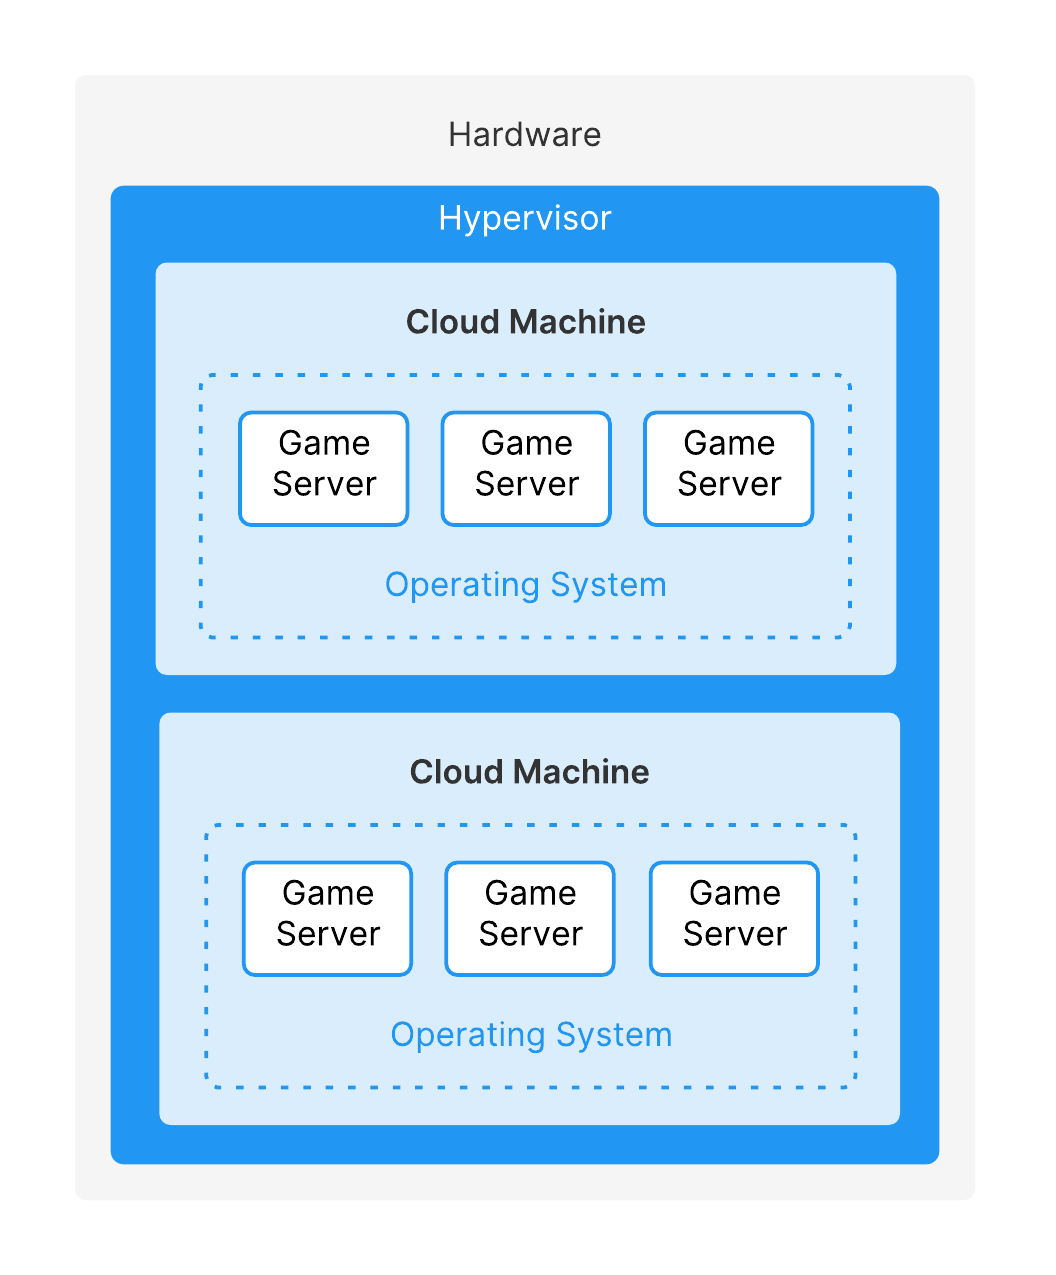 A cloud machine is virtualized so multiple amchines can share the same hardware